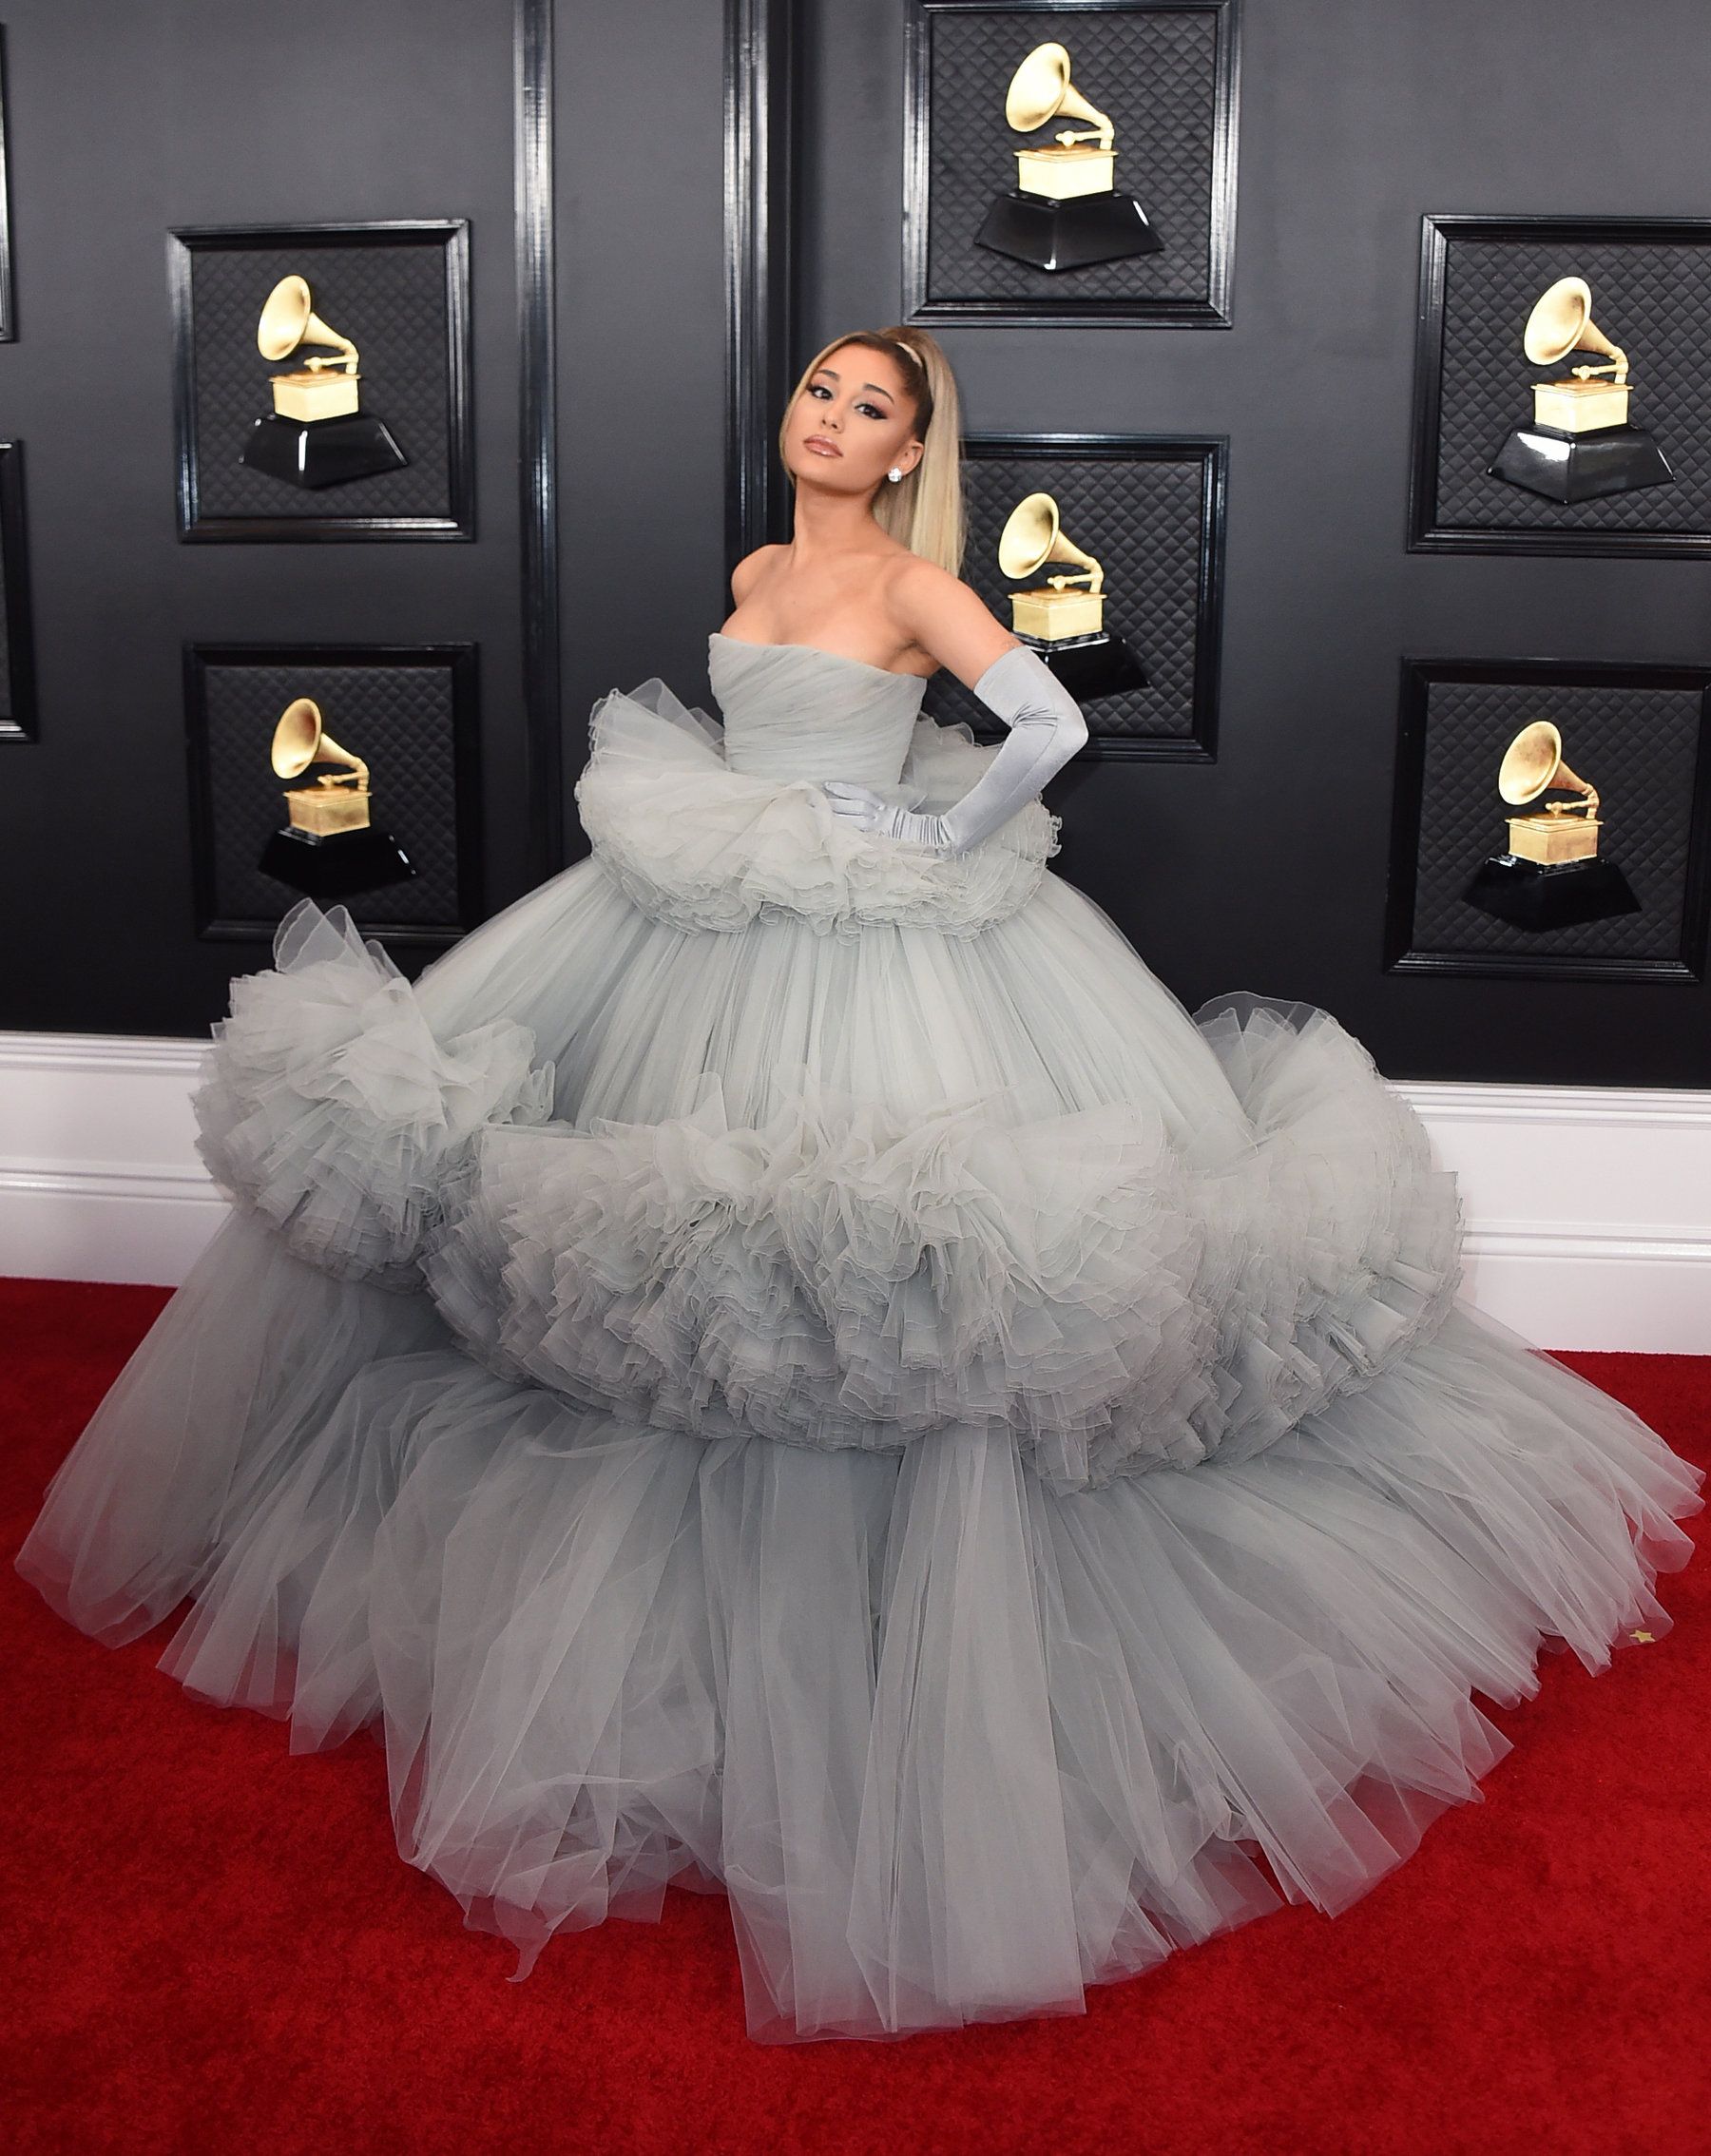 The Best Looks From the 2020 Grammys Red Carpet